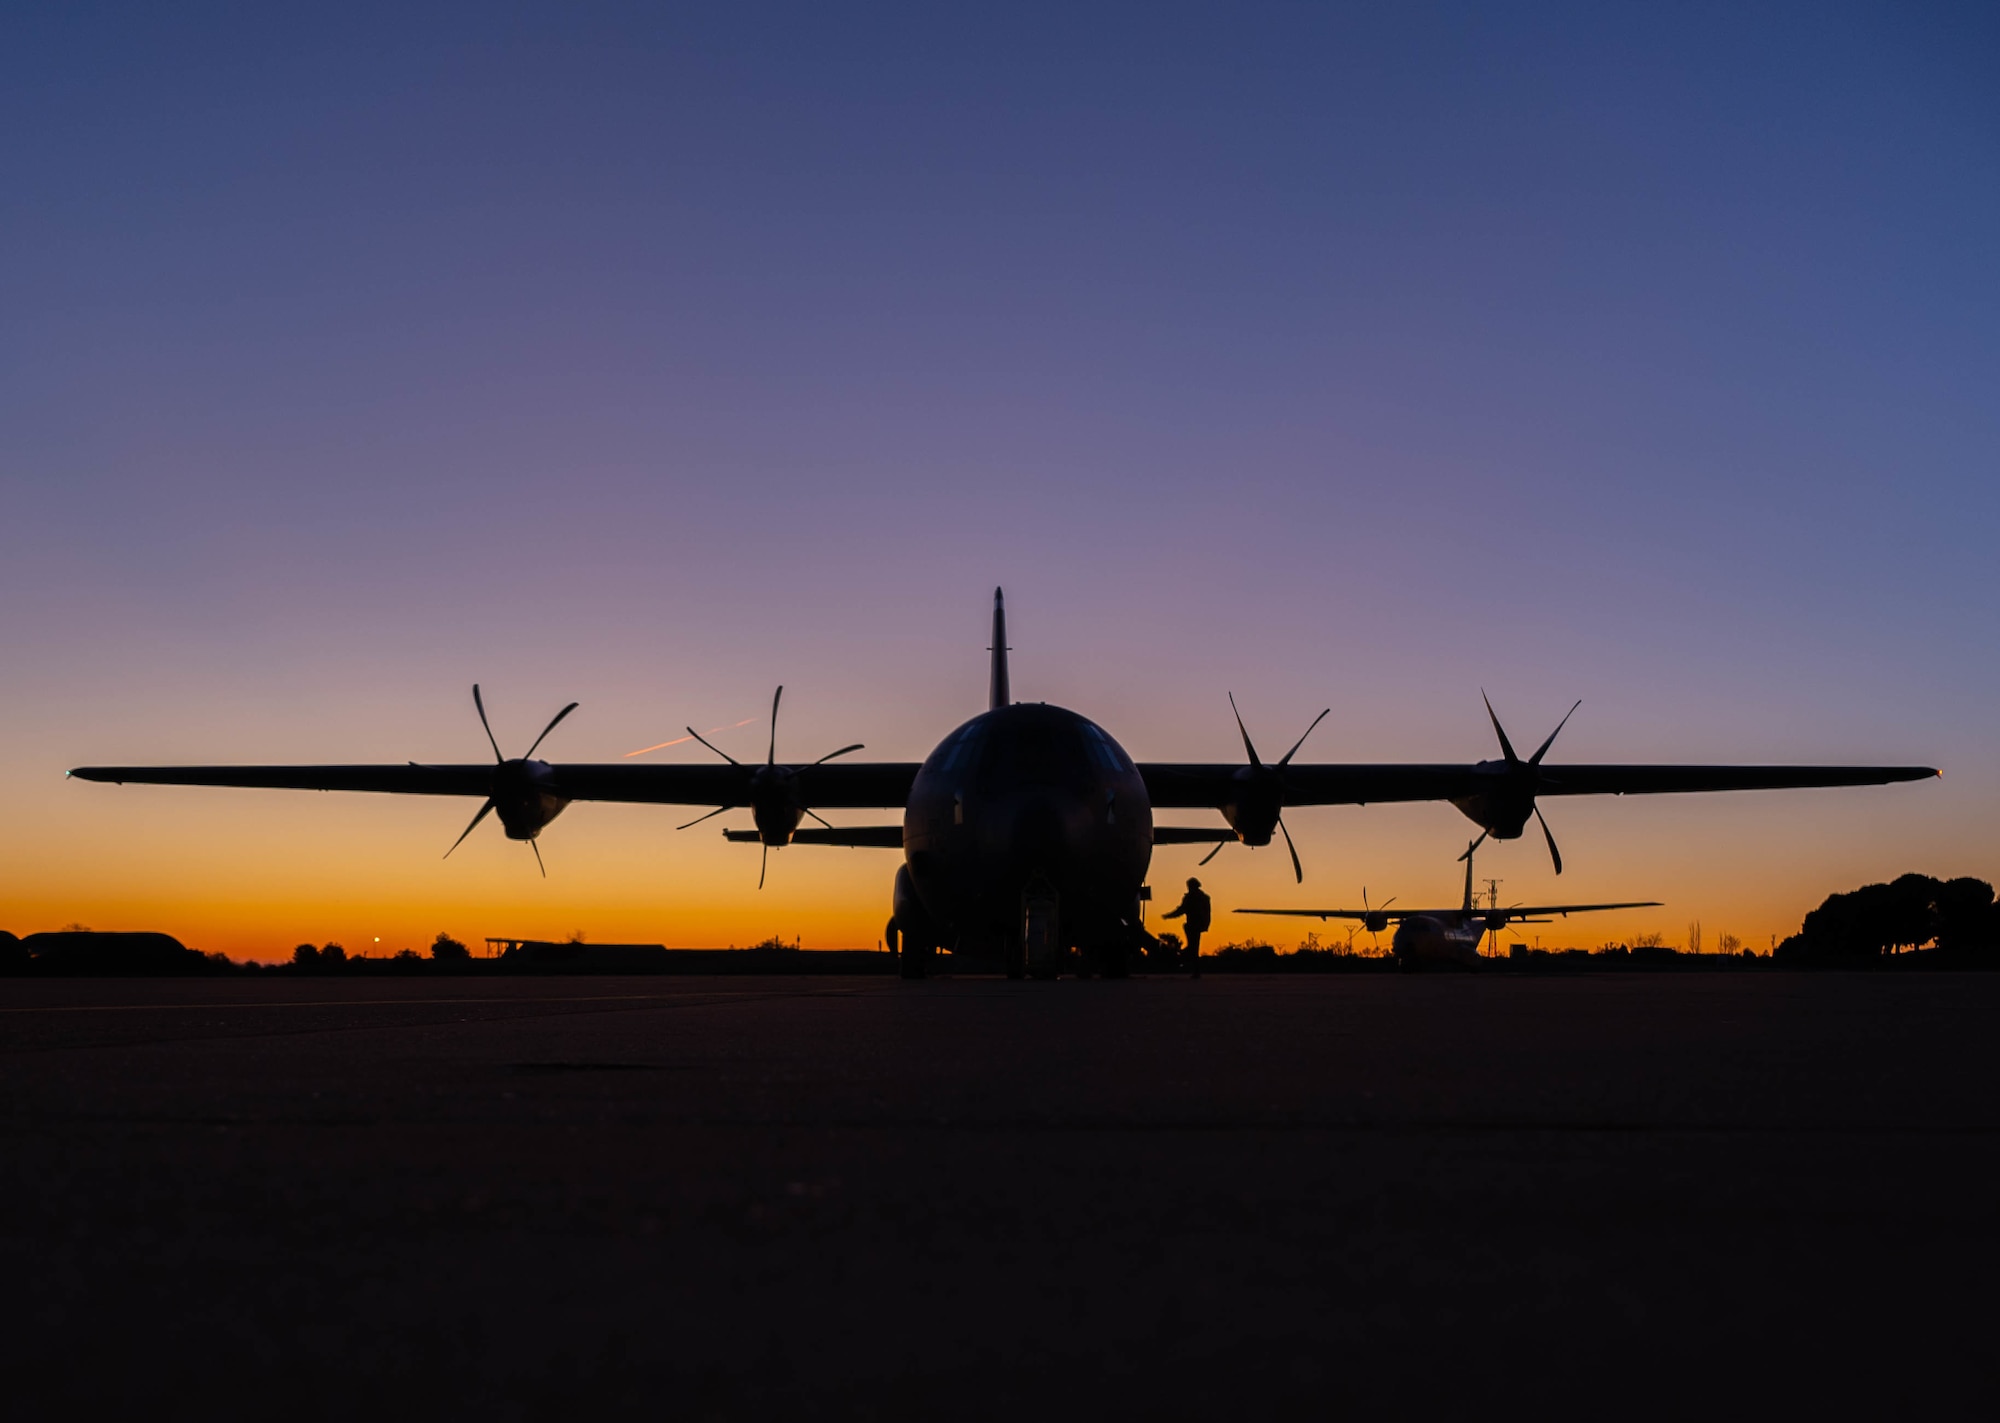 An aircraft is a silhouette against a purple, blue and orange sky.